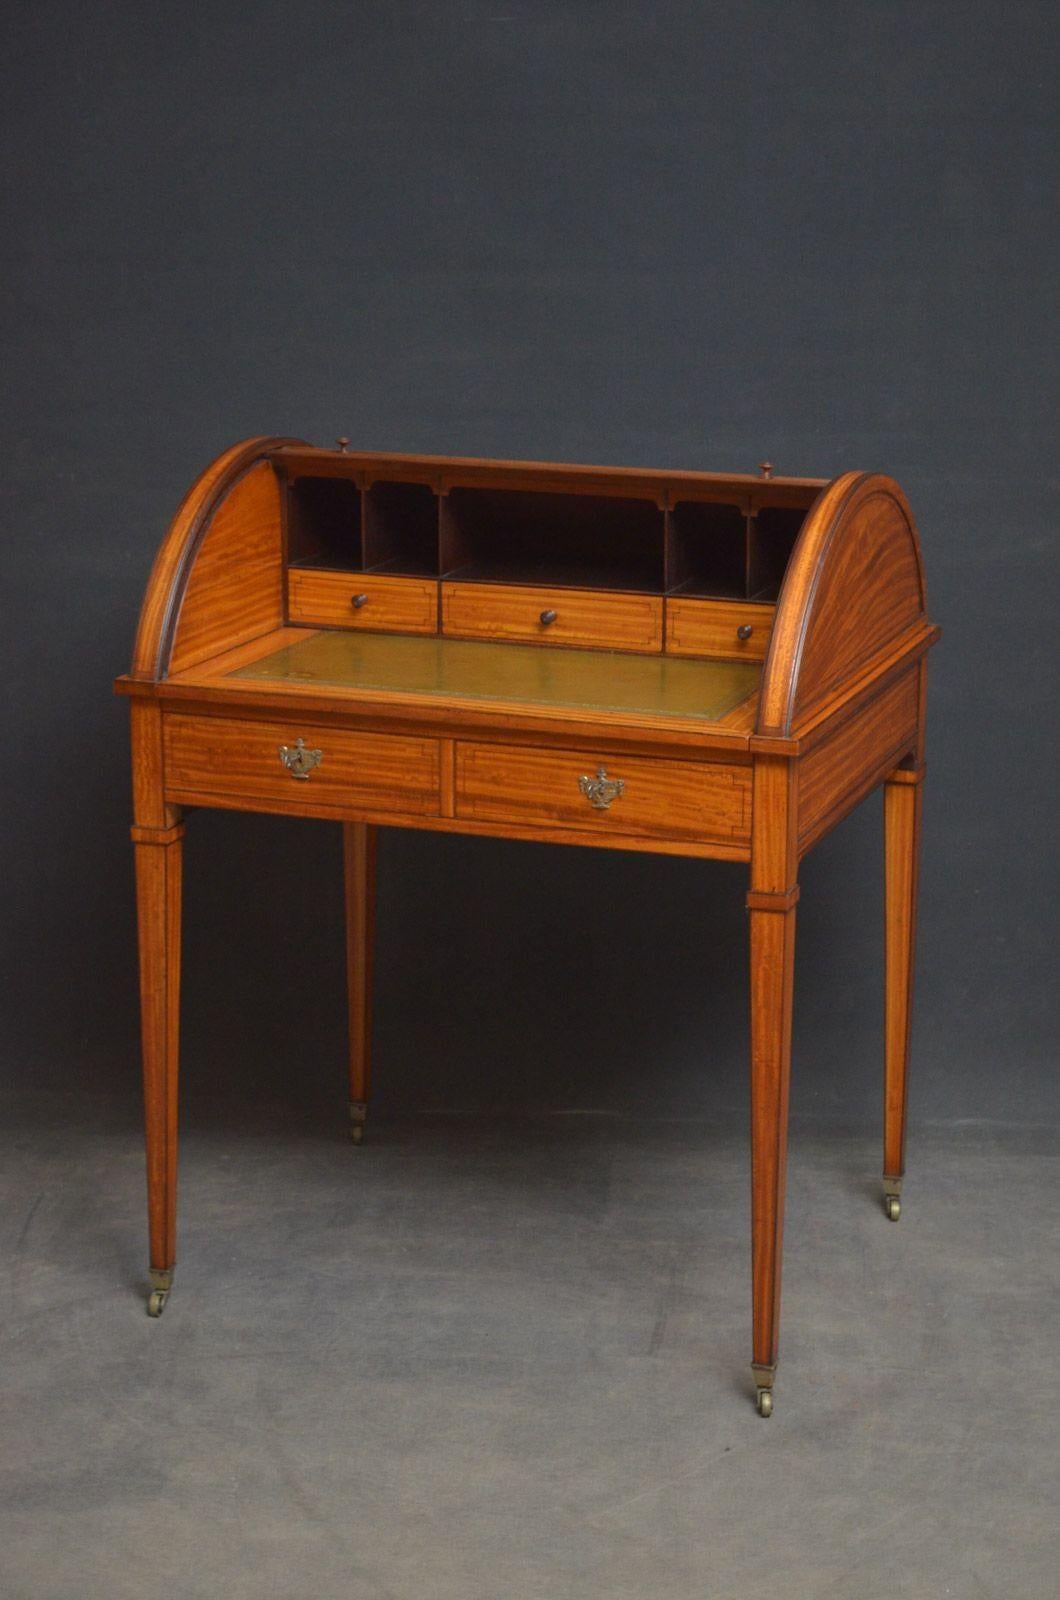 Superb Sheraton Revival Satinwood Desk In Good Condition For Sale In Whaley Bridge, GB